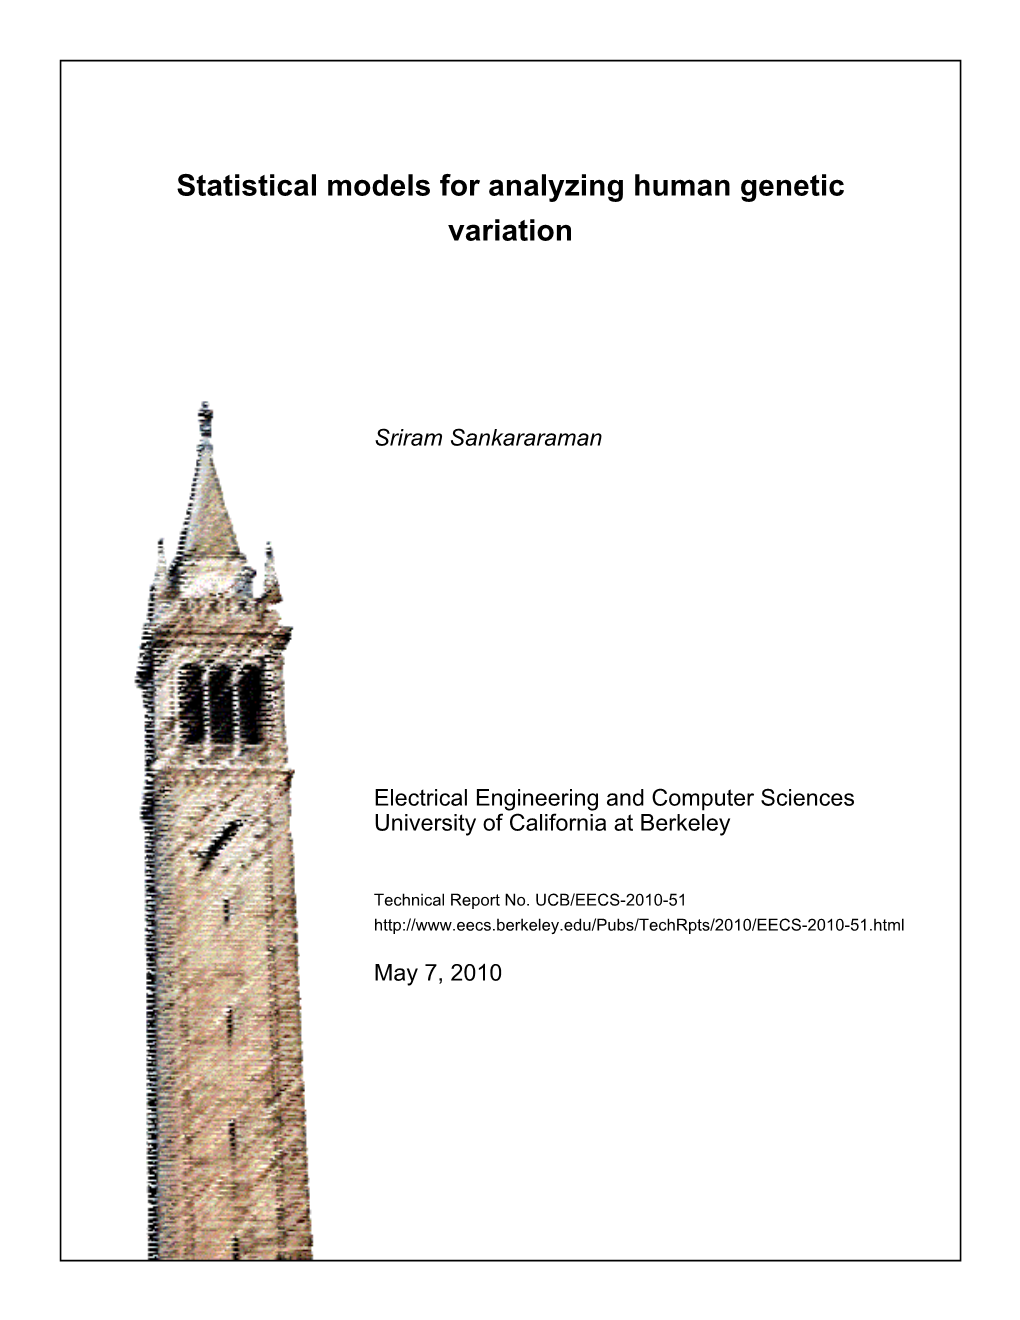 Statistical Models for Analyzing Human Genetic Variation